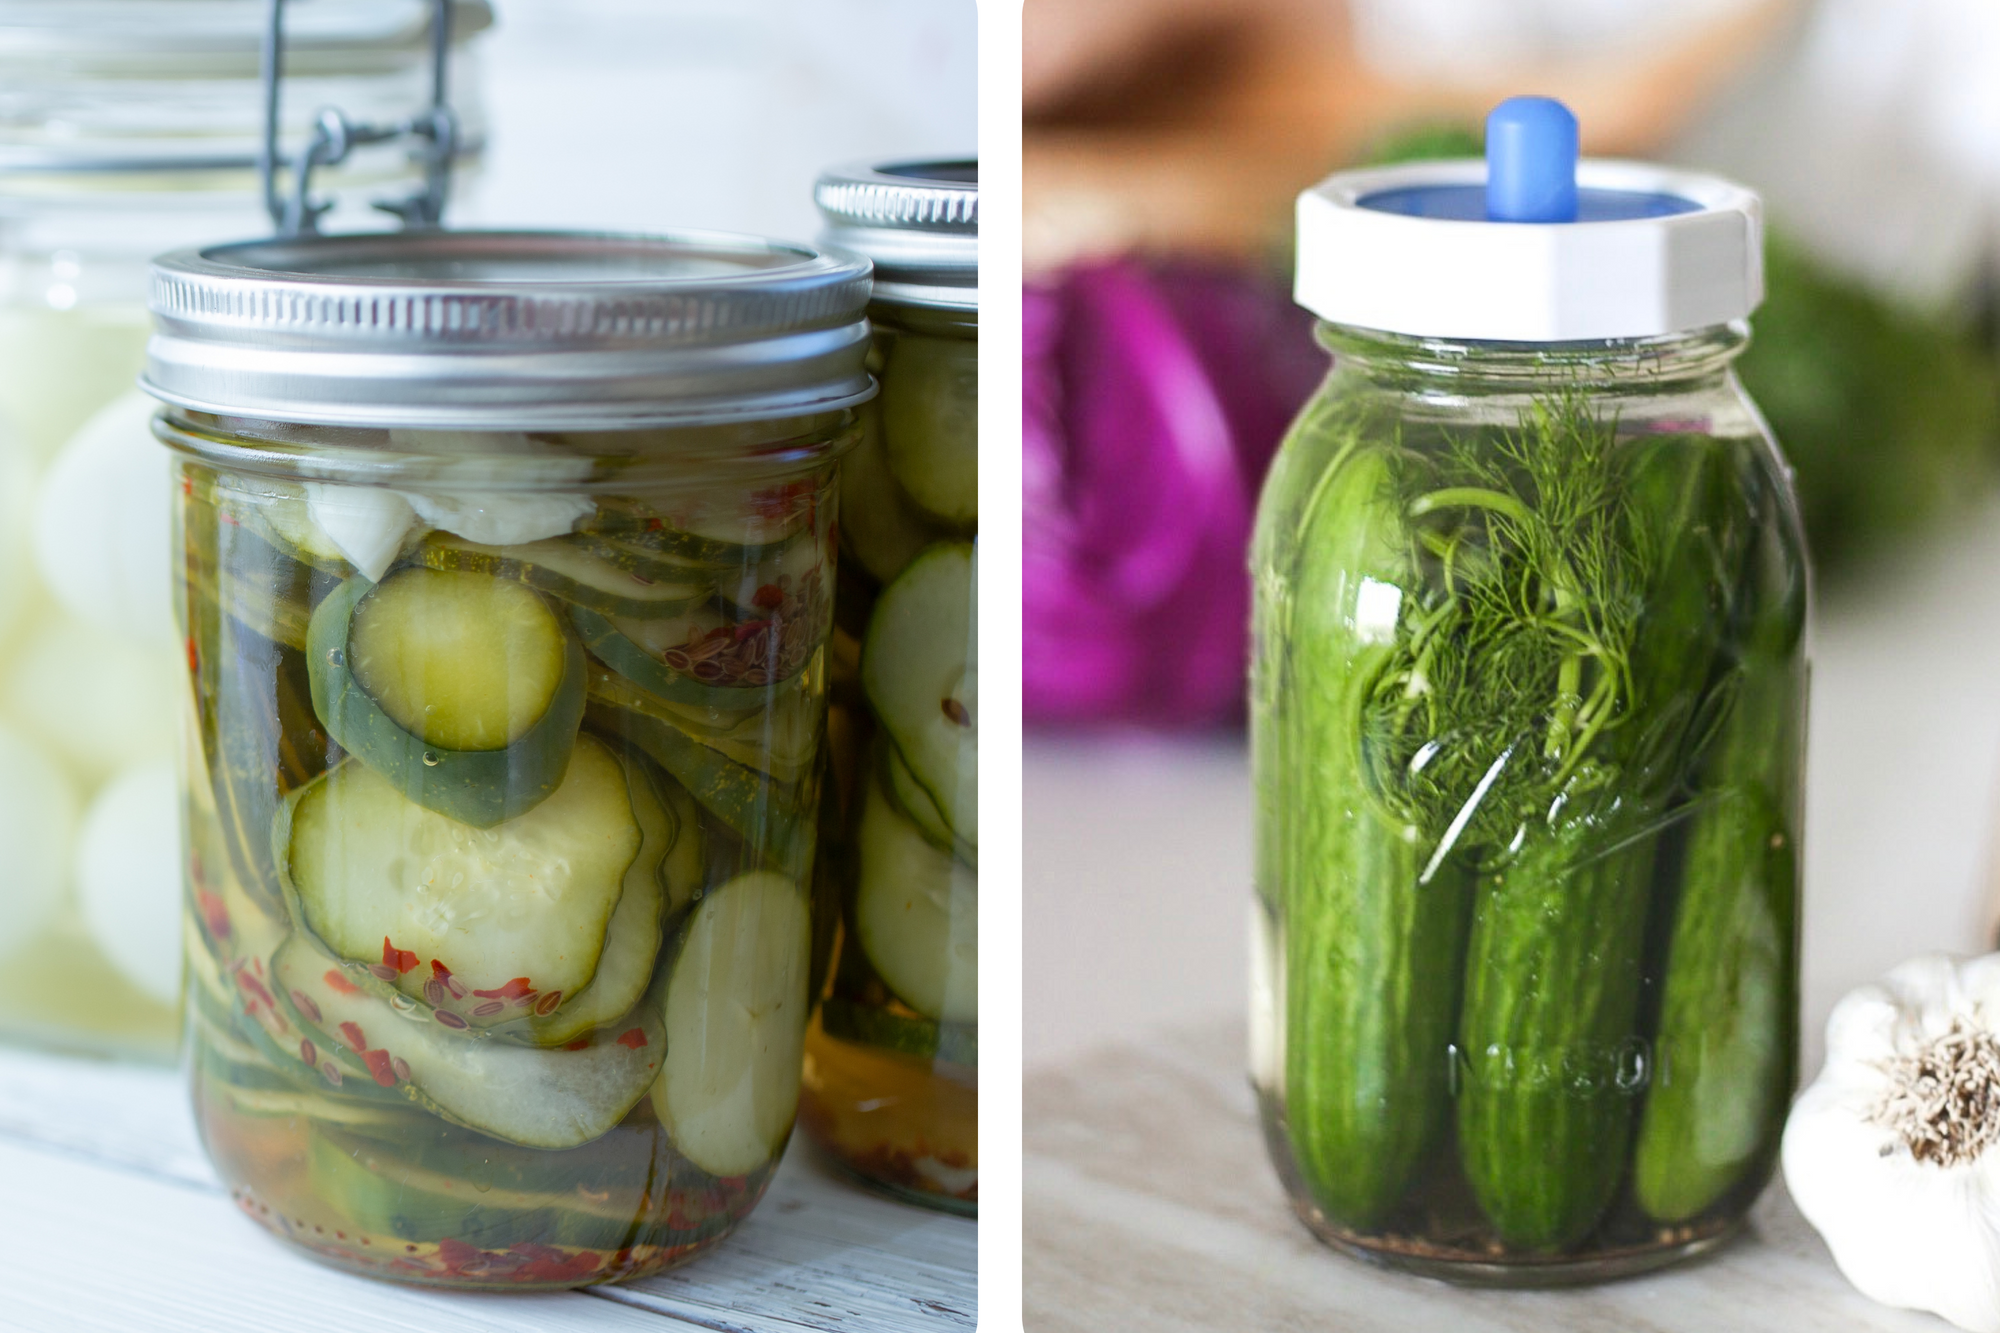 Pickling vs. Fermenting - so what's the difference?